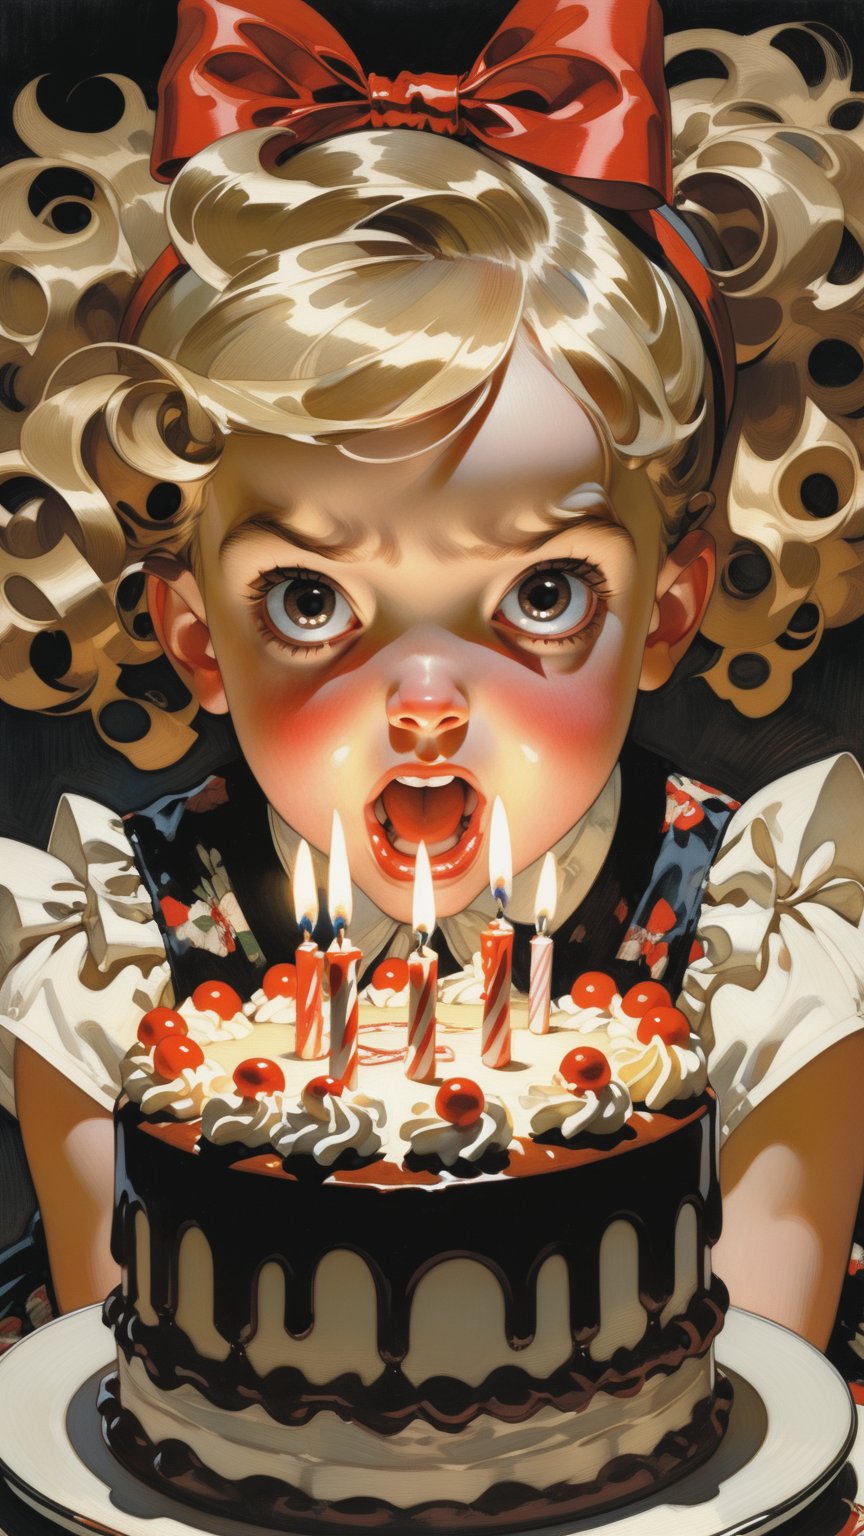 Painting of a beautiful young girl wearing a headband bow and sitting behind a birthday cake. Very dark night scene. Strong shadows. art by J.C. Leyendecker. She has dark shadows under her eyes,  an angry expression on her face,  and flushed cheeks. In stark contrast to the festive occasion,  she seems disconnected from the joy that surrounds her. Presents are visible in the background,  adding to the surreal atmosphere. Her hair is a striking mix of red and black,  drawing attention to her defiant stance. This image captures an intense moment where innocence meets anger.extremely high-resolution details,  photographic,  realism pushed to extreme,  fine texture,  4k,  ultra-detailed,  high quality,  high contrast